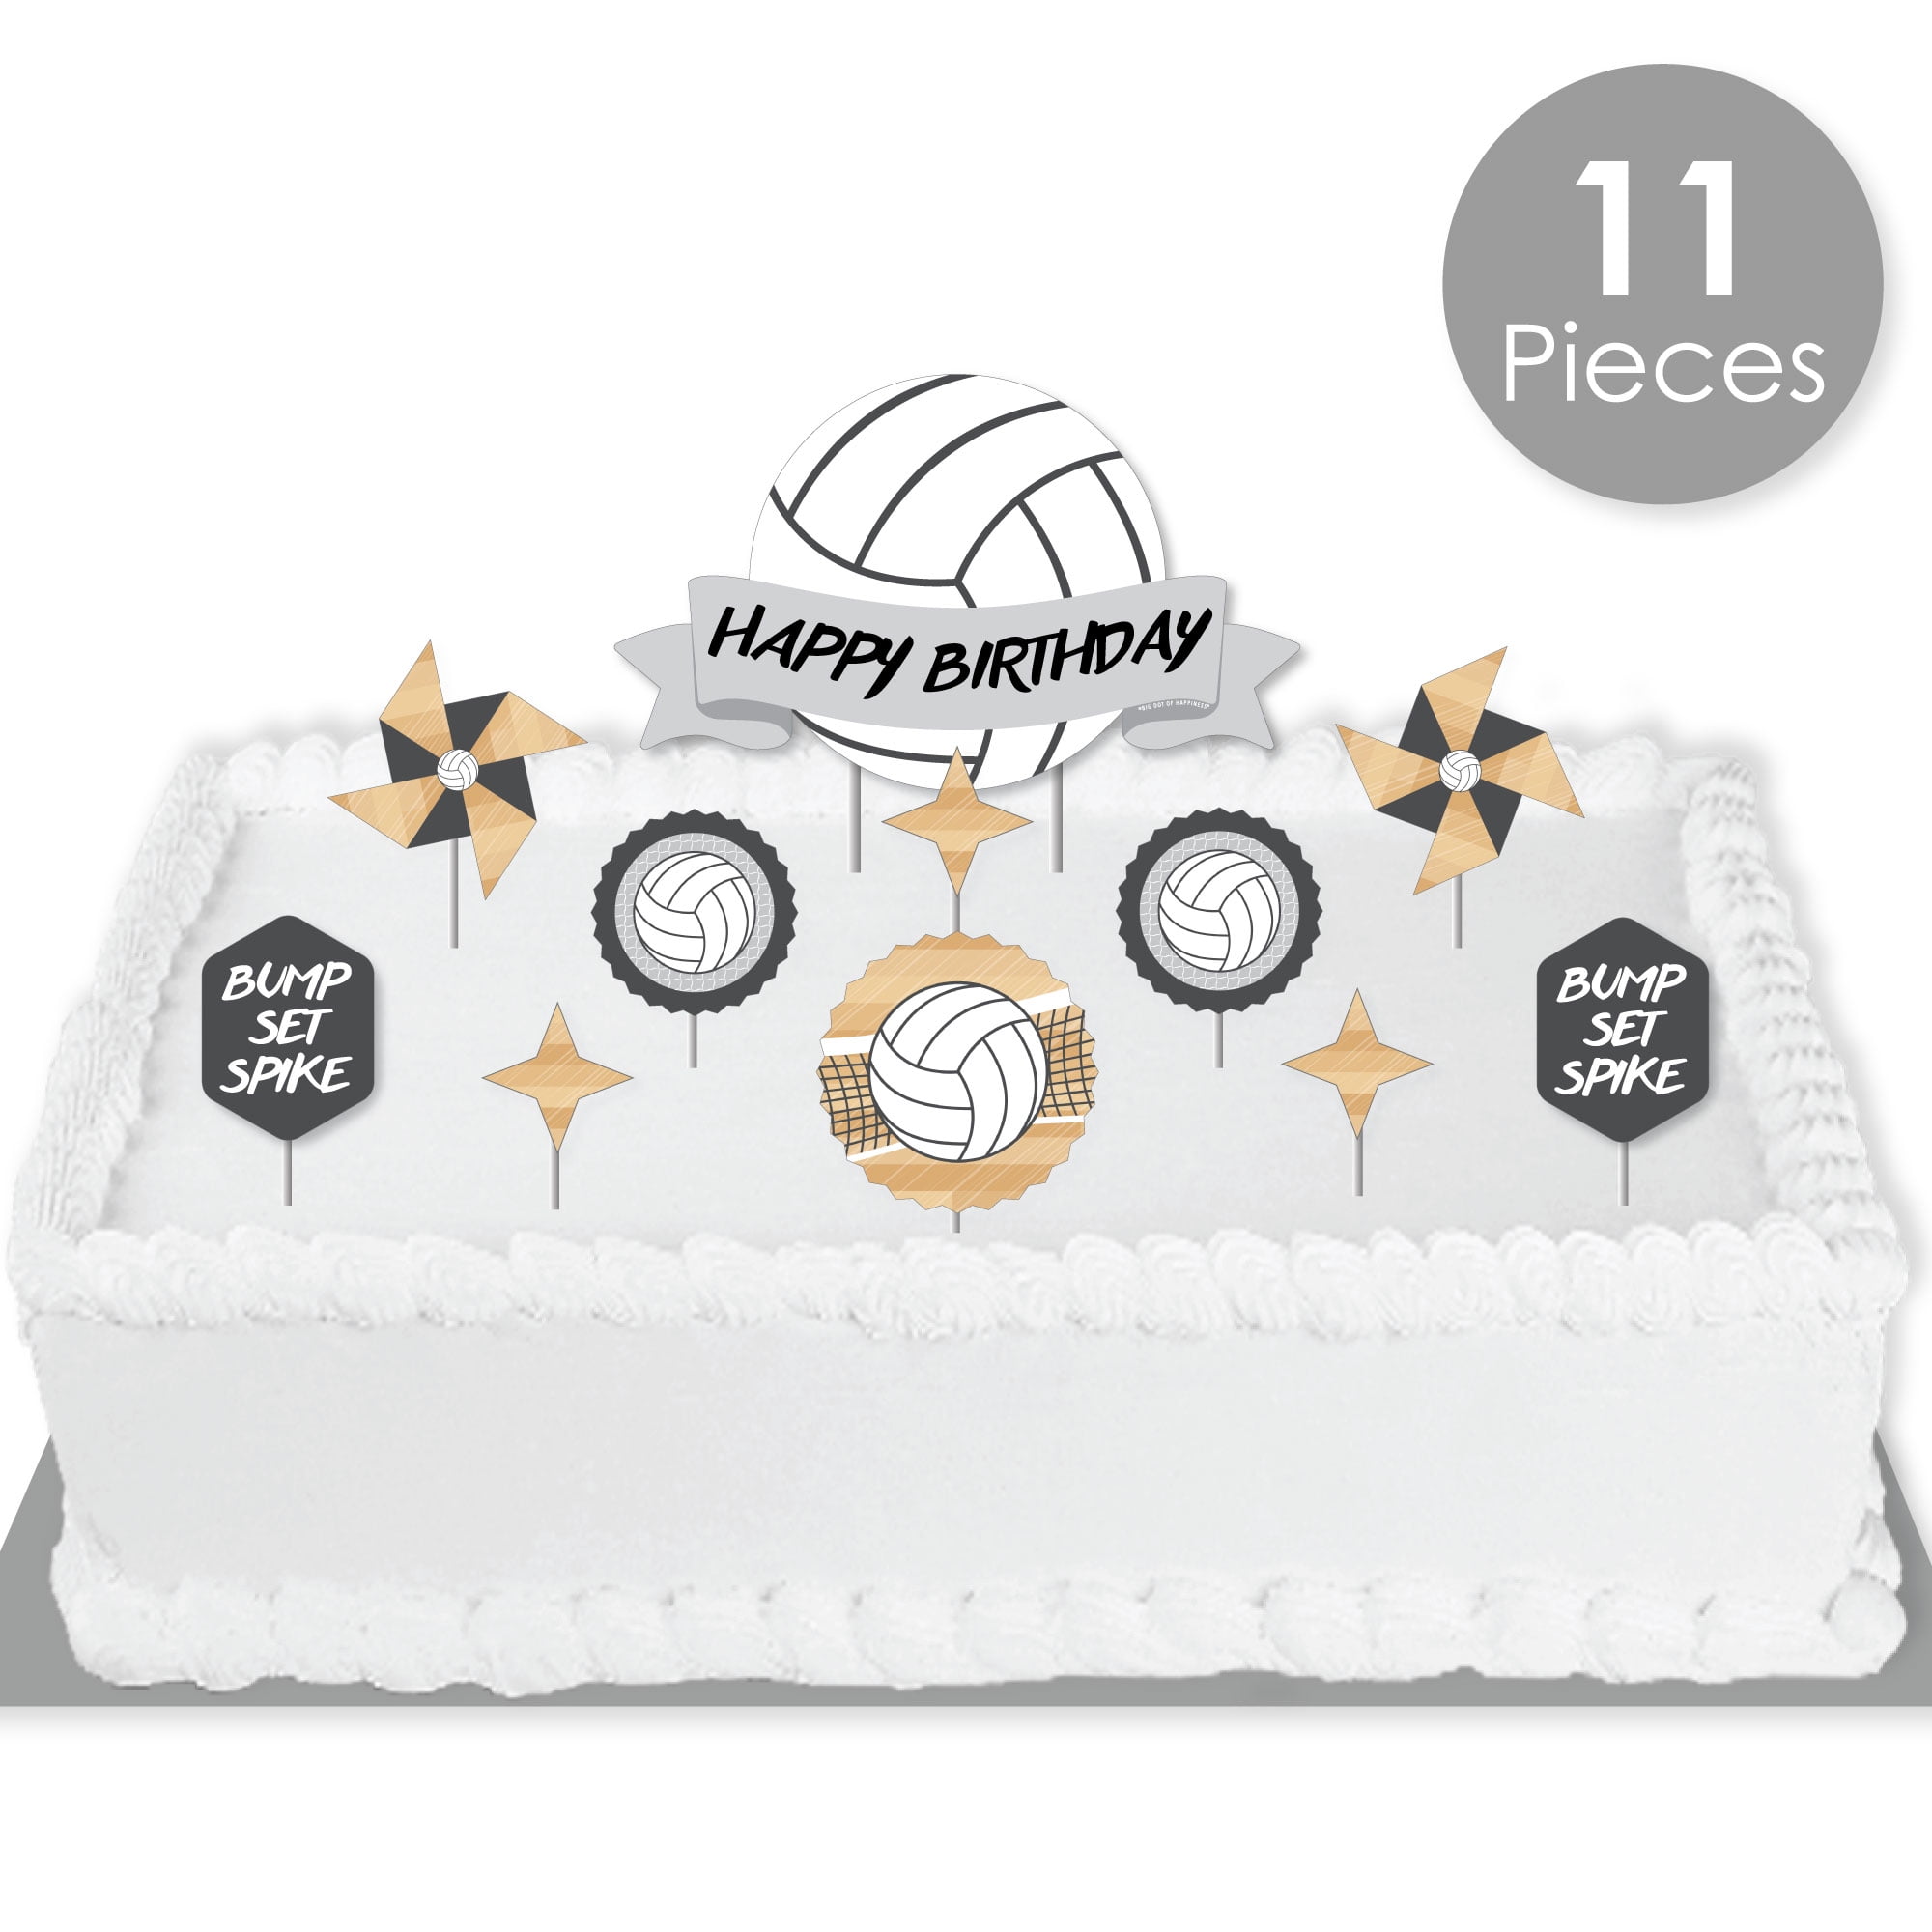 Volleyball cake with whipped cream - YouTube